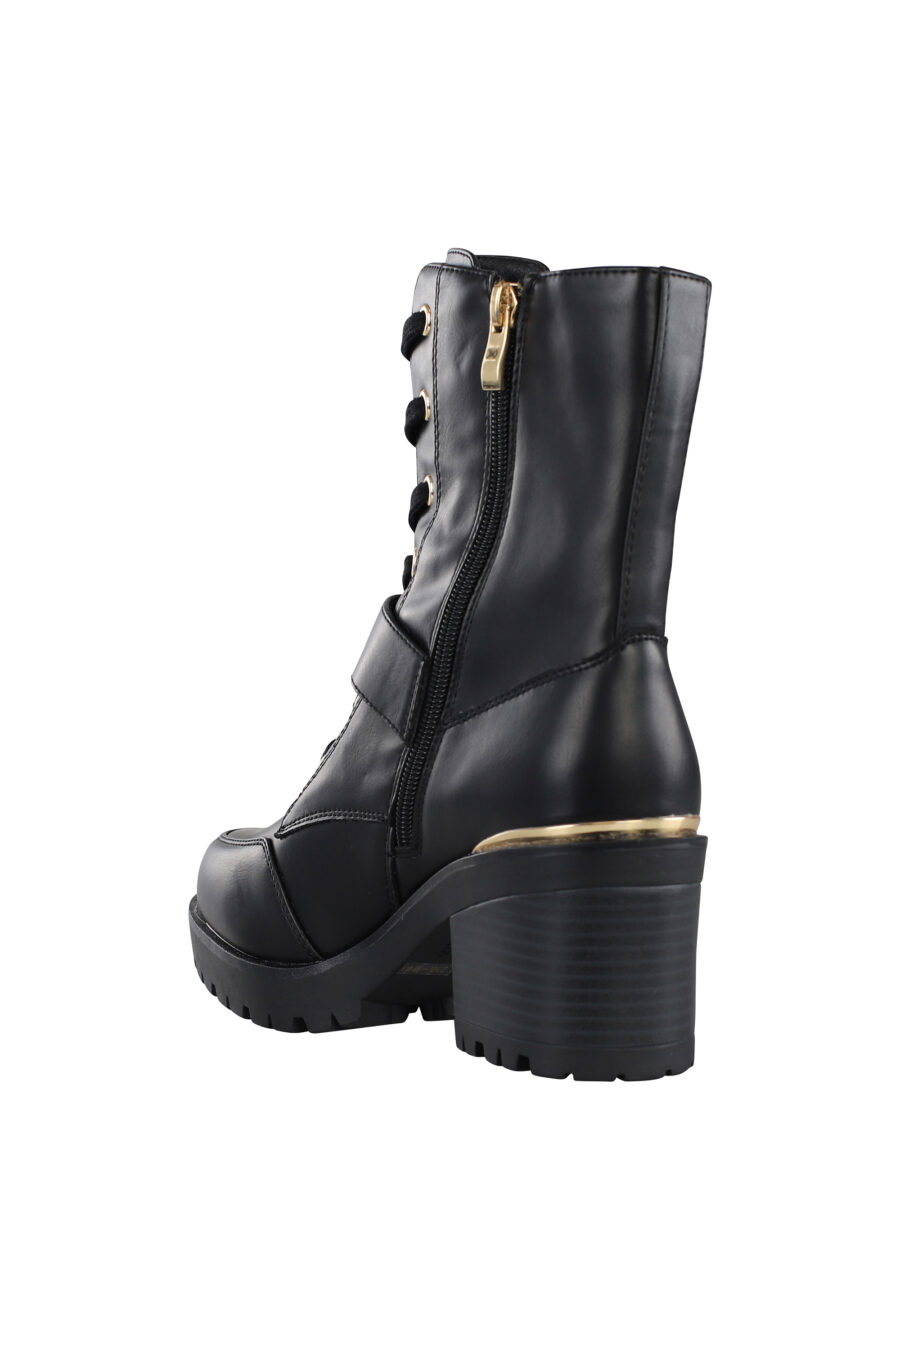 Black boots with baroque buckle and heel - IMG 7129